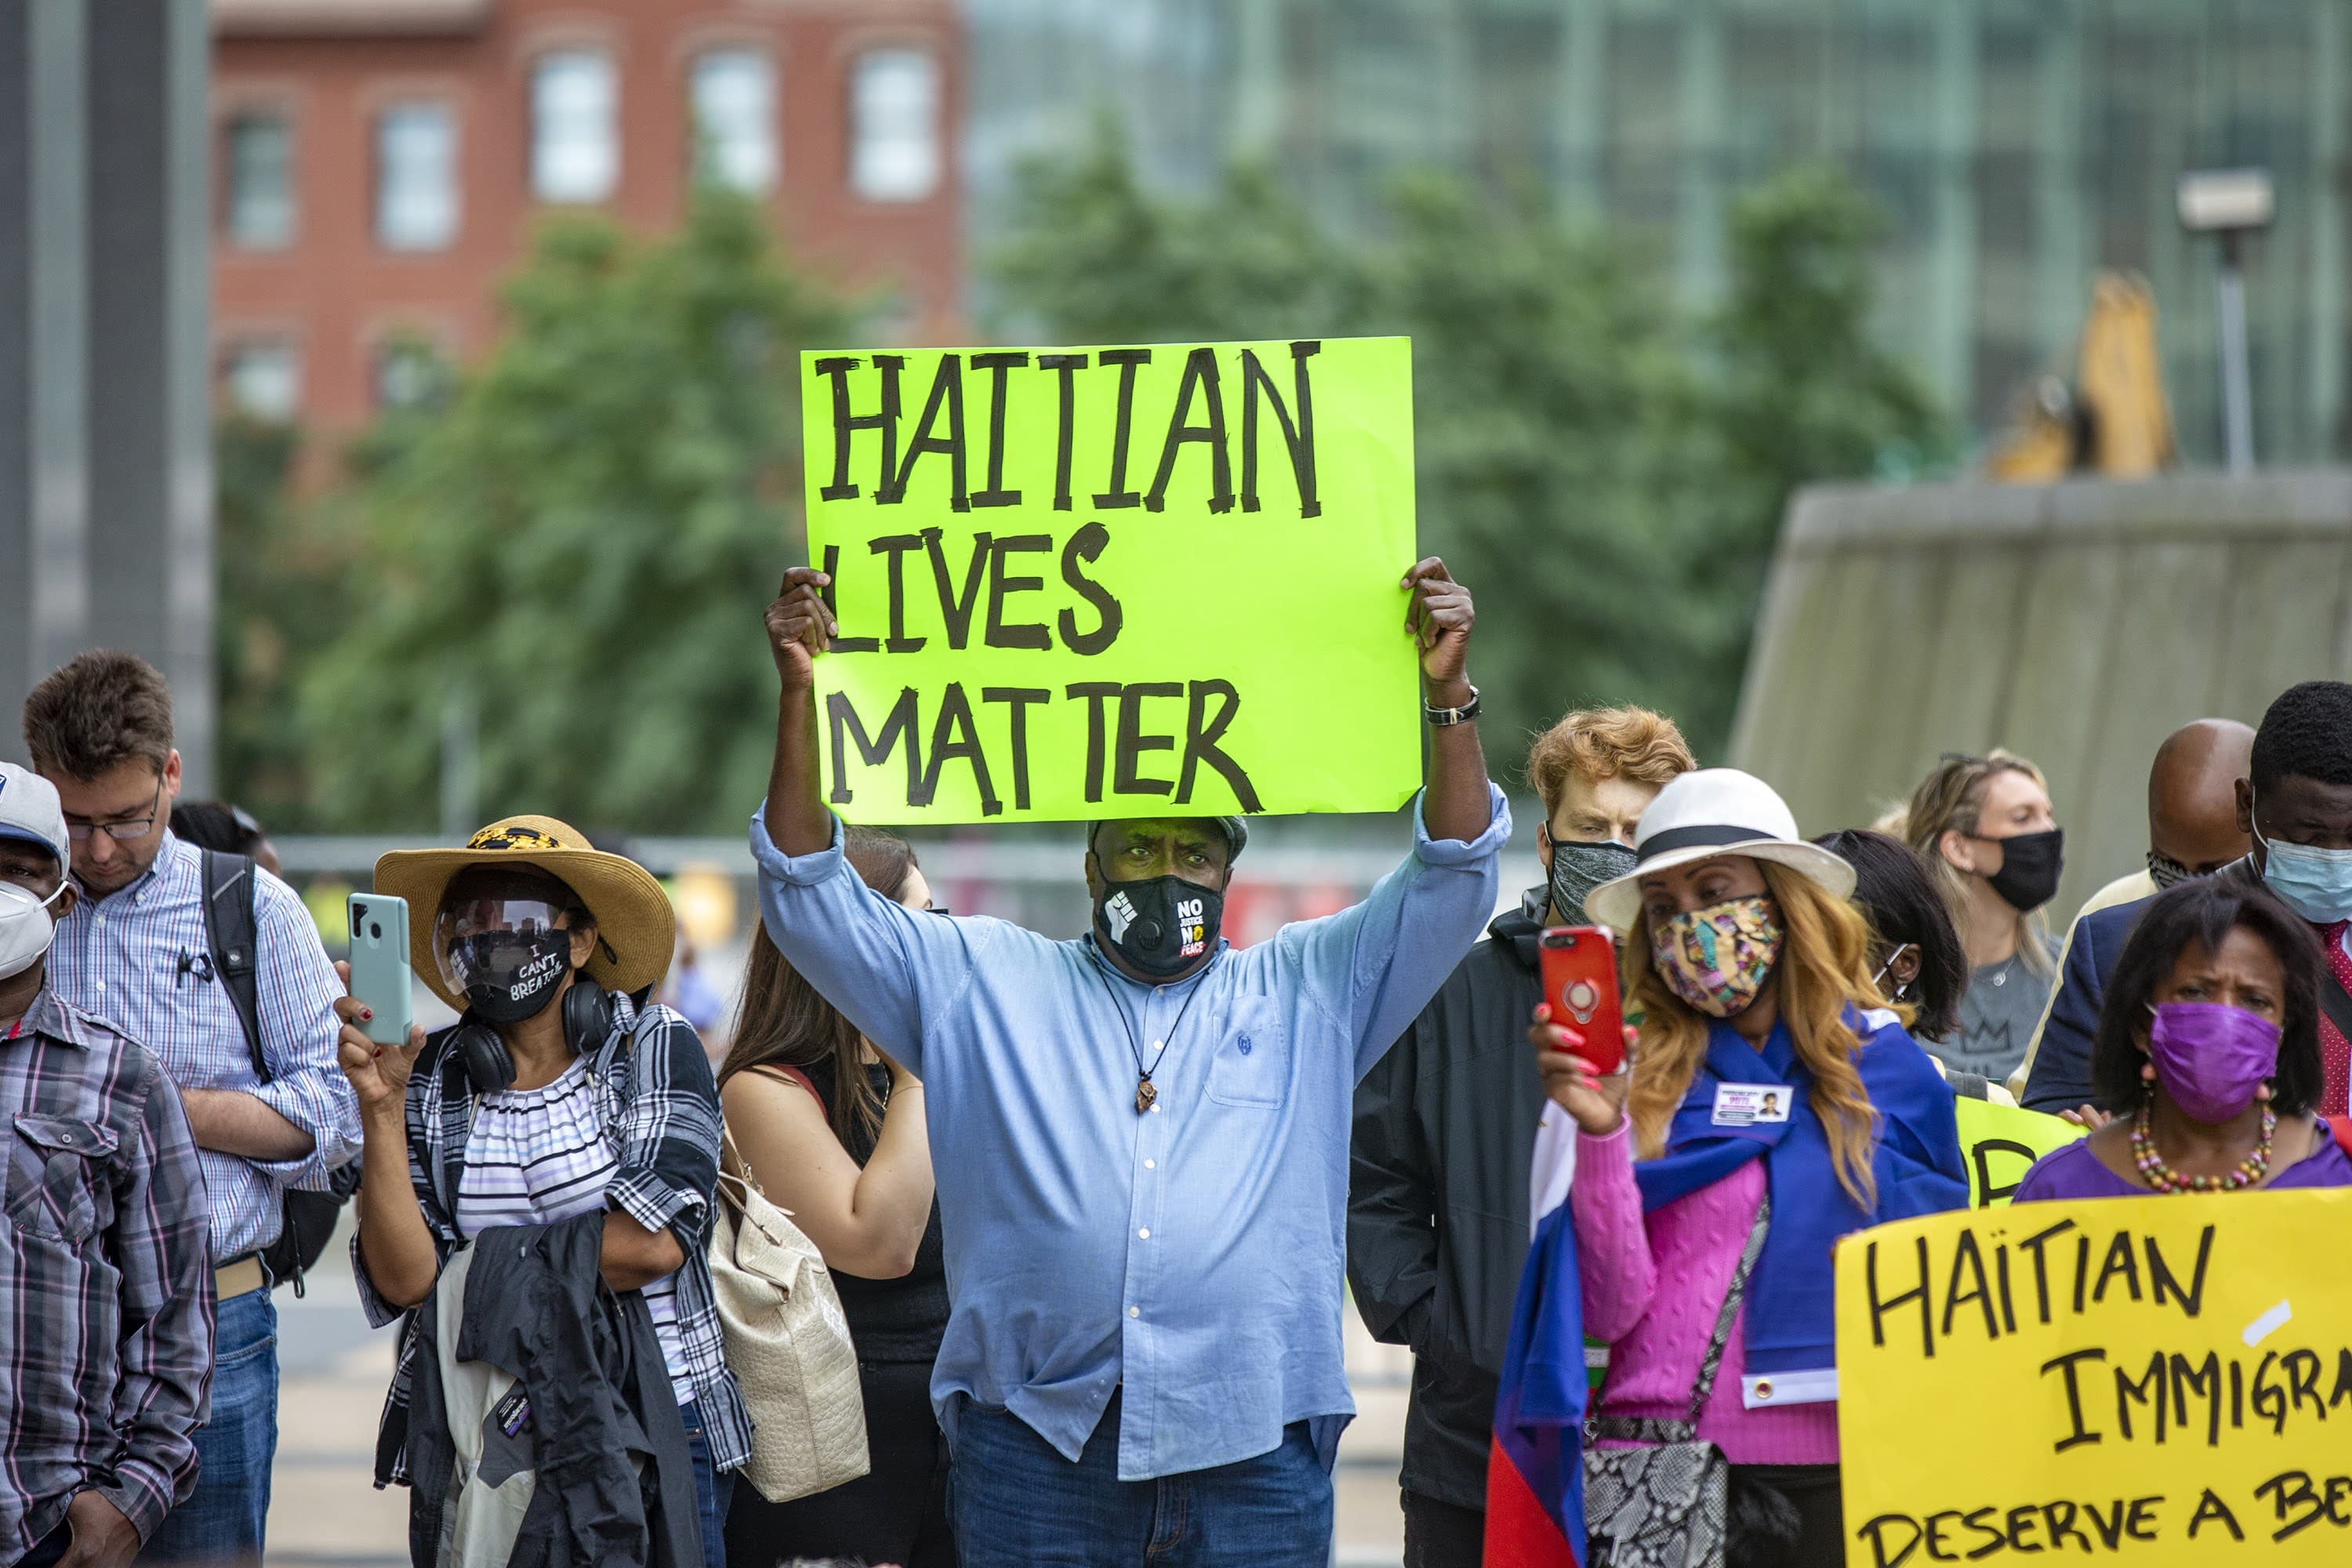 About 200 people gathered for the Solidarity with Haiti demonstration at John F. Kennedy Federal Building in Downtown Boston to protest the inhumane treatment of Haitian immigrants at the Texas border. (Jesse Costa/WBUR)